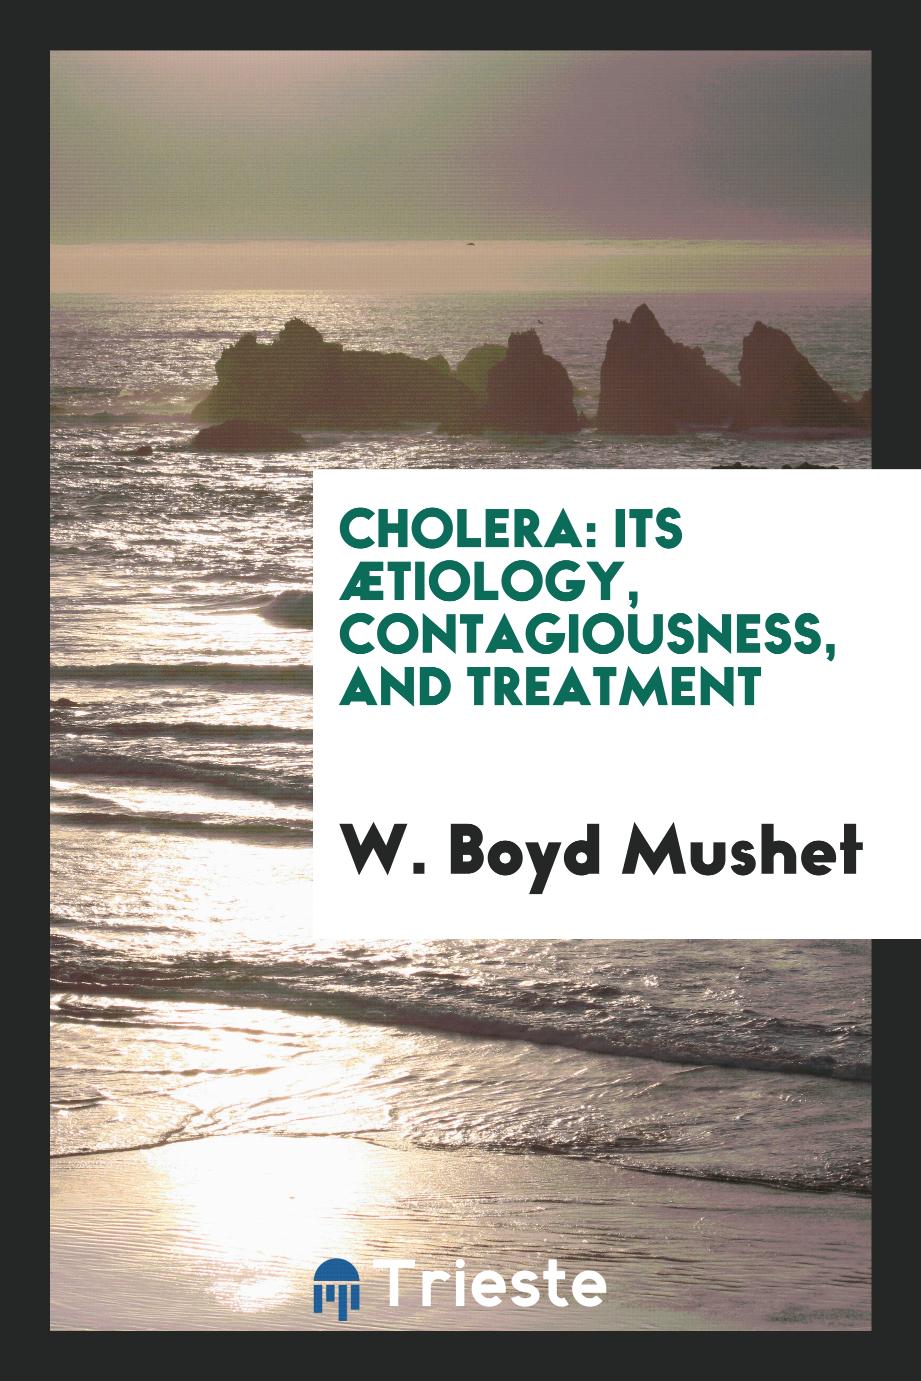 Cholera: its ætiology, contagiousness, and treatment